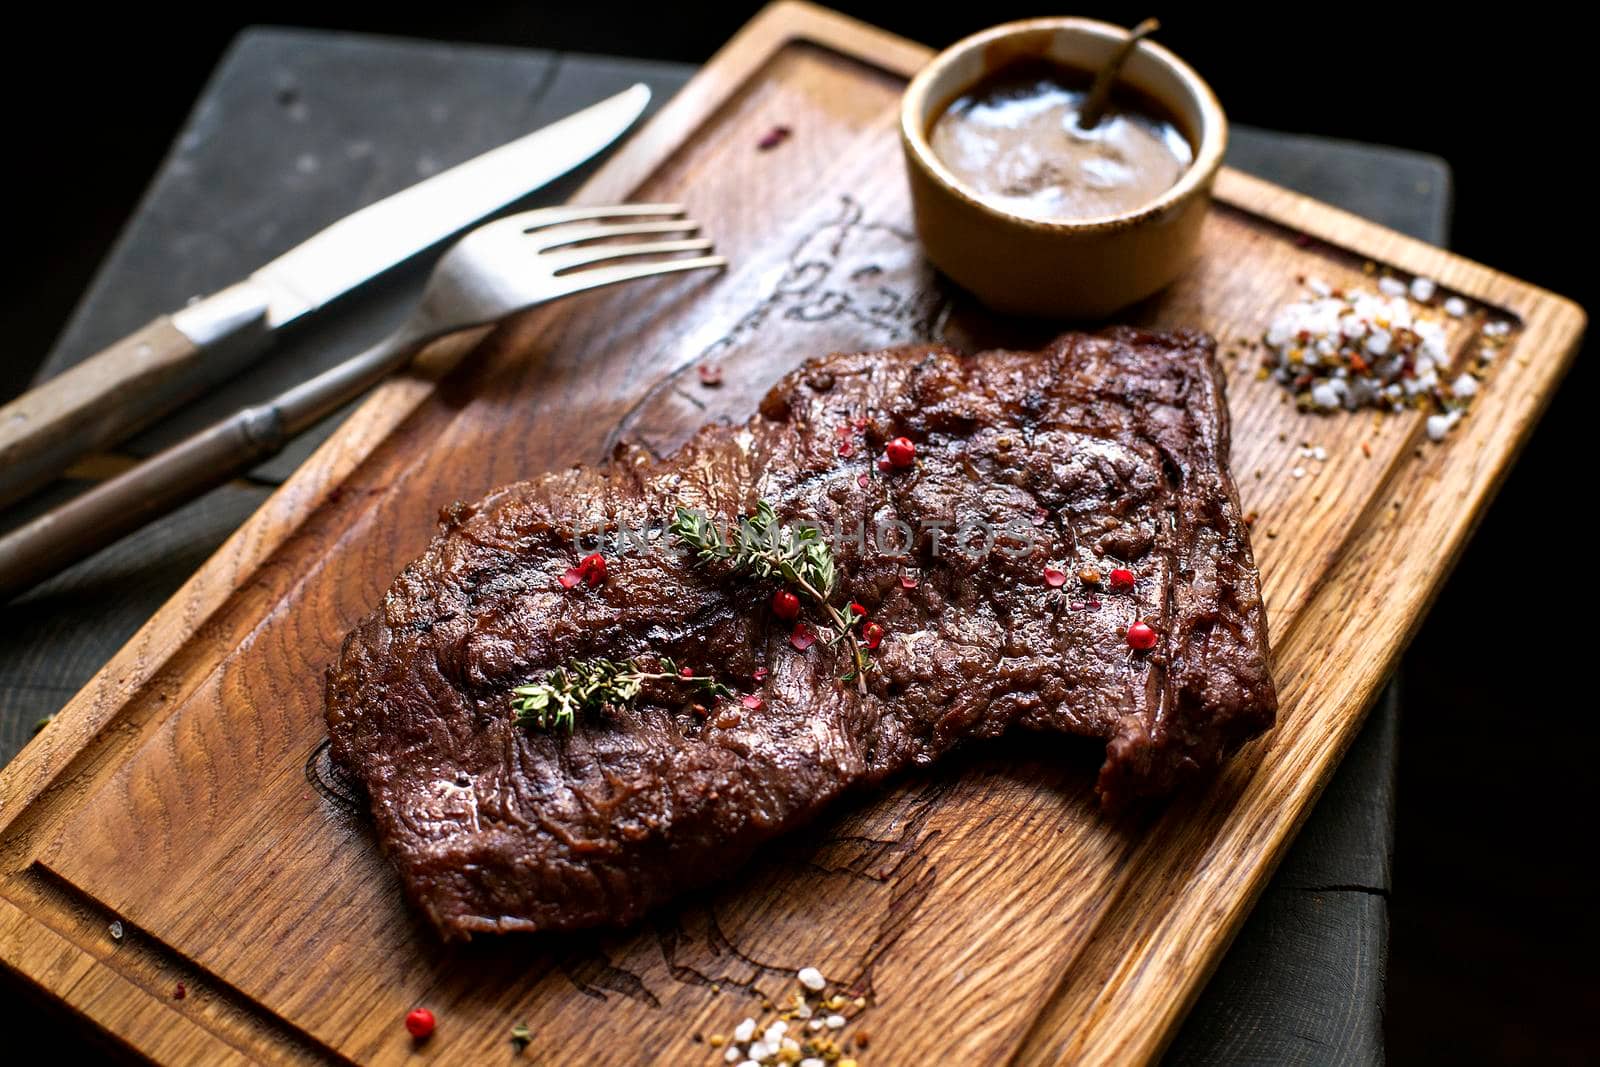 Beef steak. Piece of Grilled BBQ beef marinated in spices and herbs on a rustic wooden board over rough wooden desk with a copy space. Top view. Stock Image